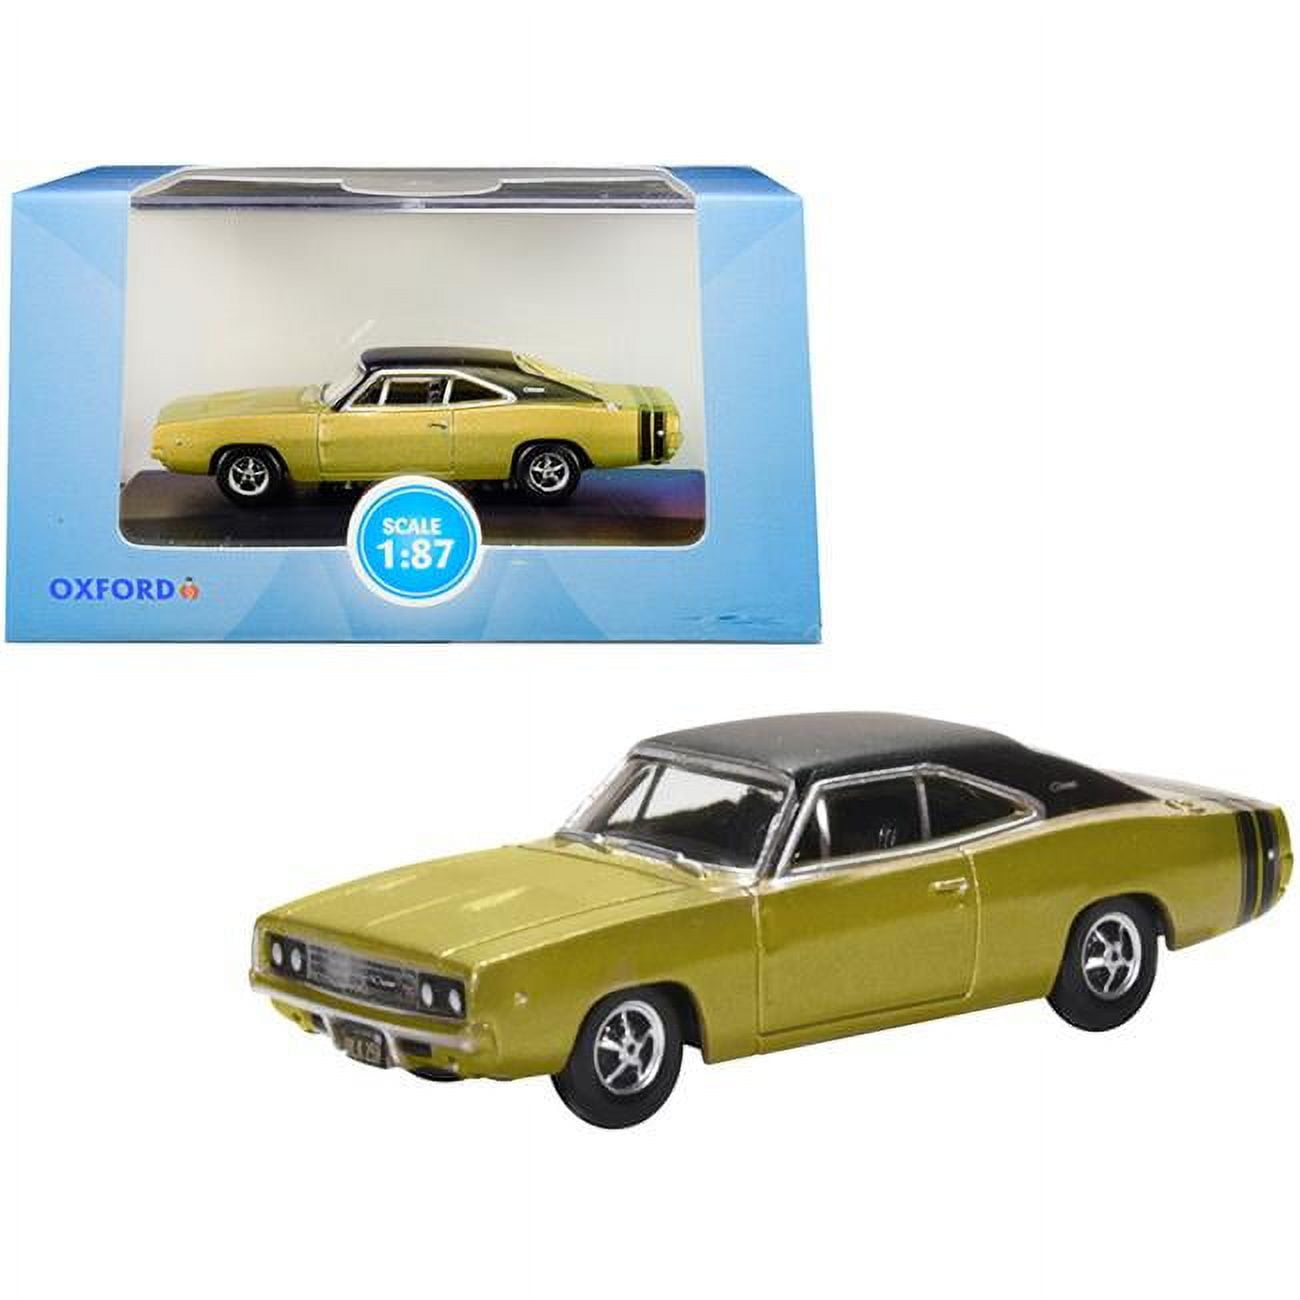 87dc68002 1968 Dodge Charger Top & Stripes 1 By 87 Ho Scale Diecast Model Car, Gold & Black